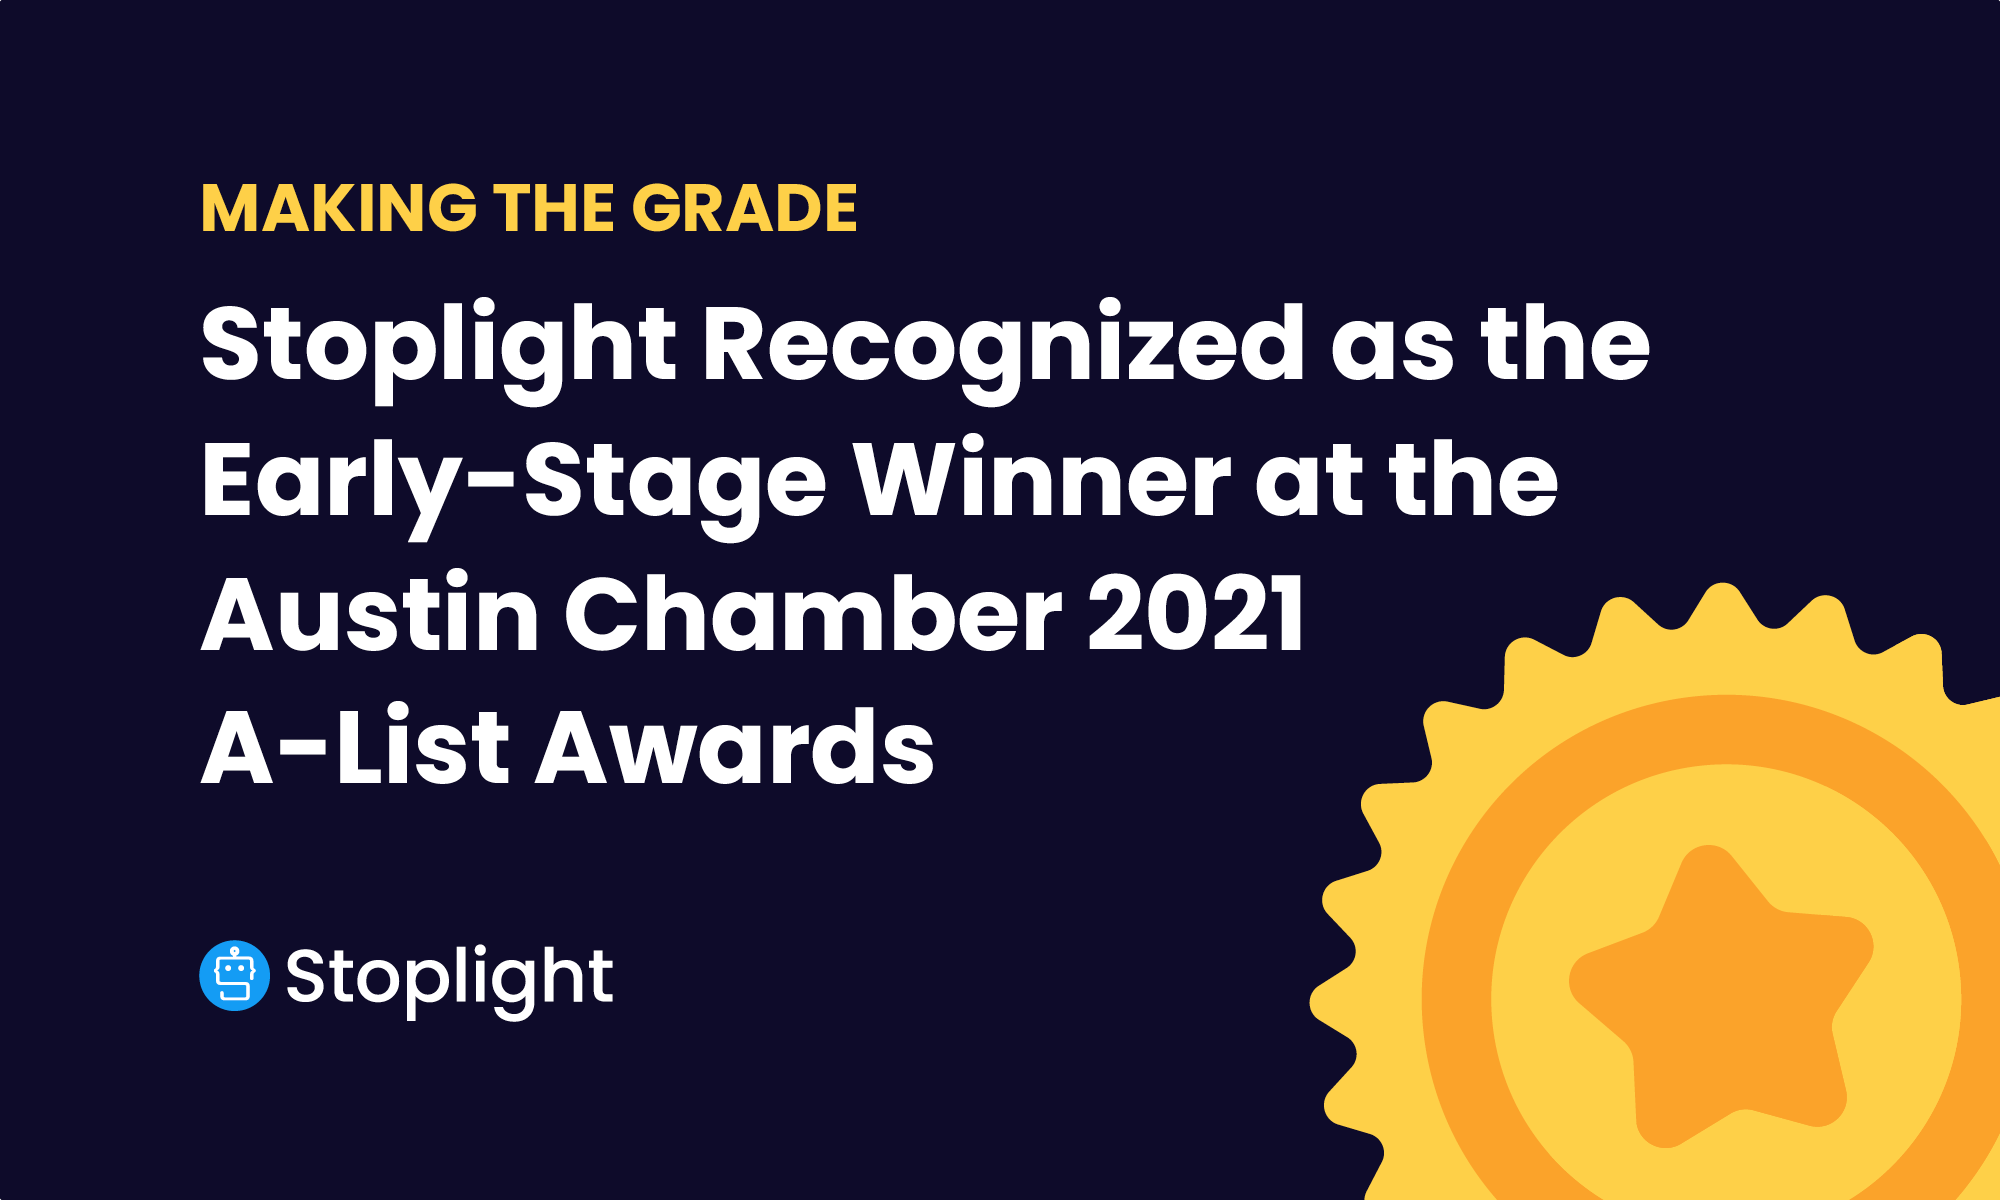 Making the Grade: Stoplight Recognized as the Early-Stage Winner at the Austin Chamber 2021 A-List Awards